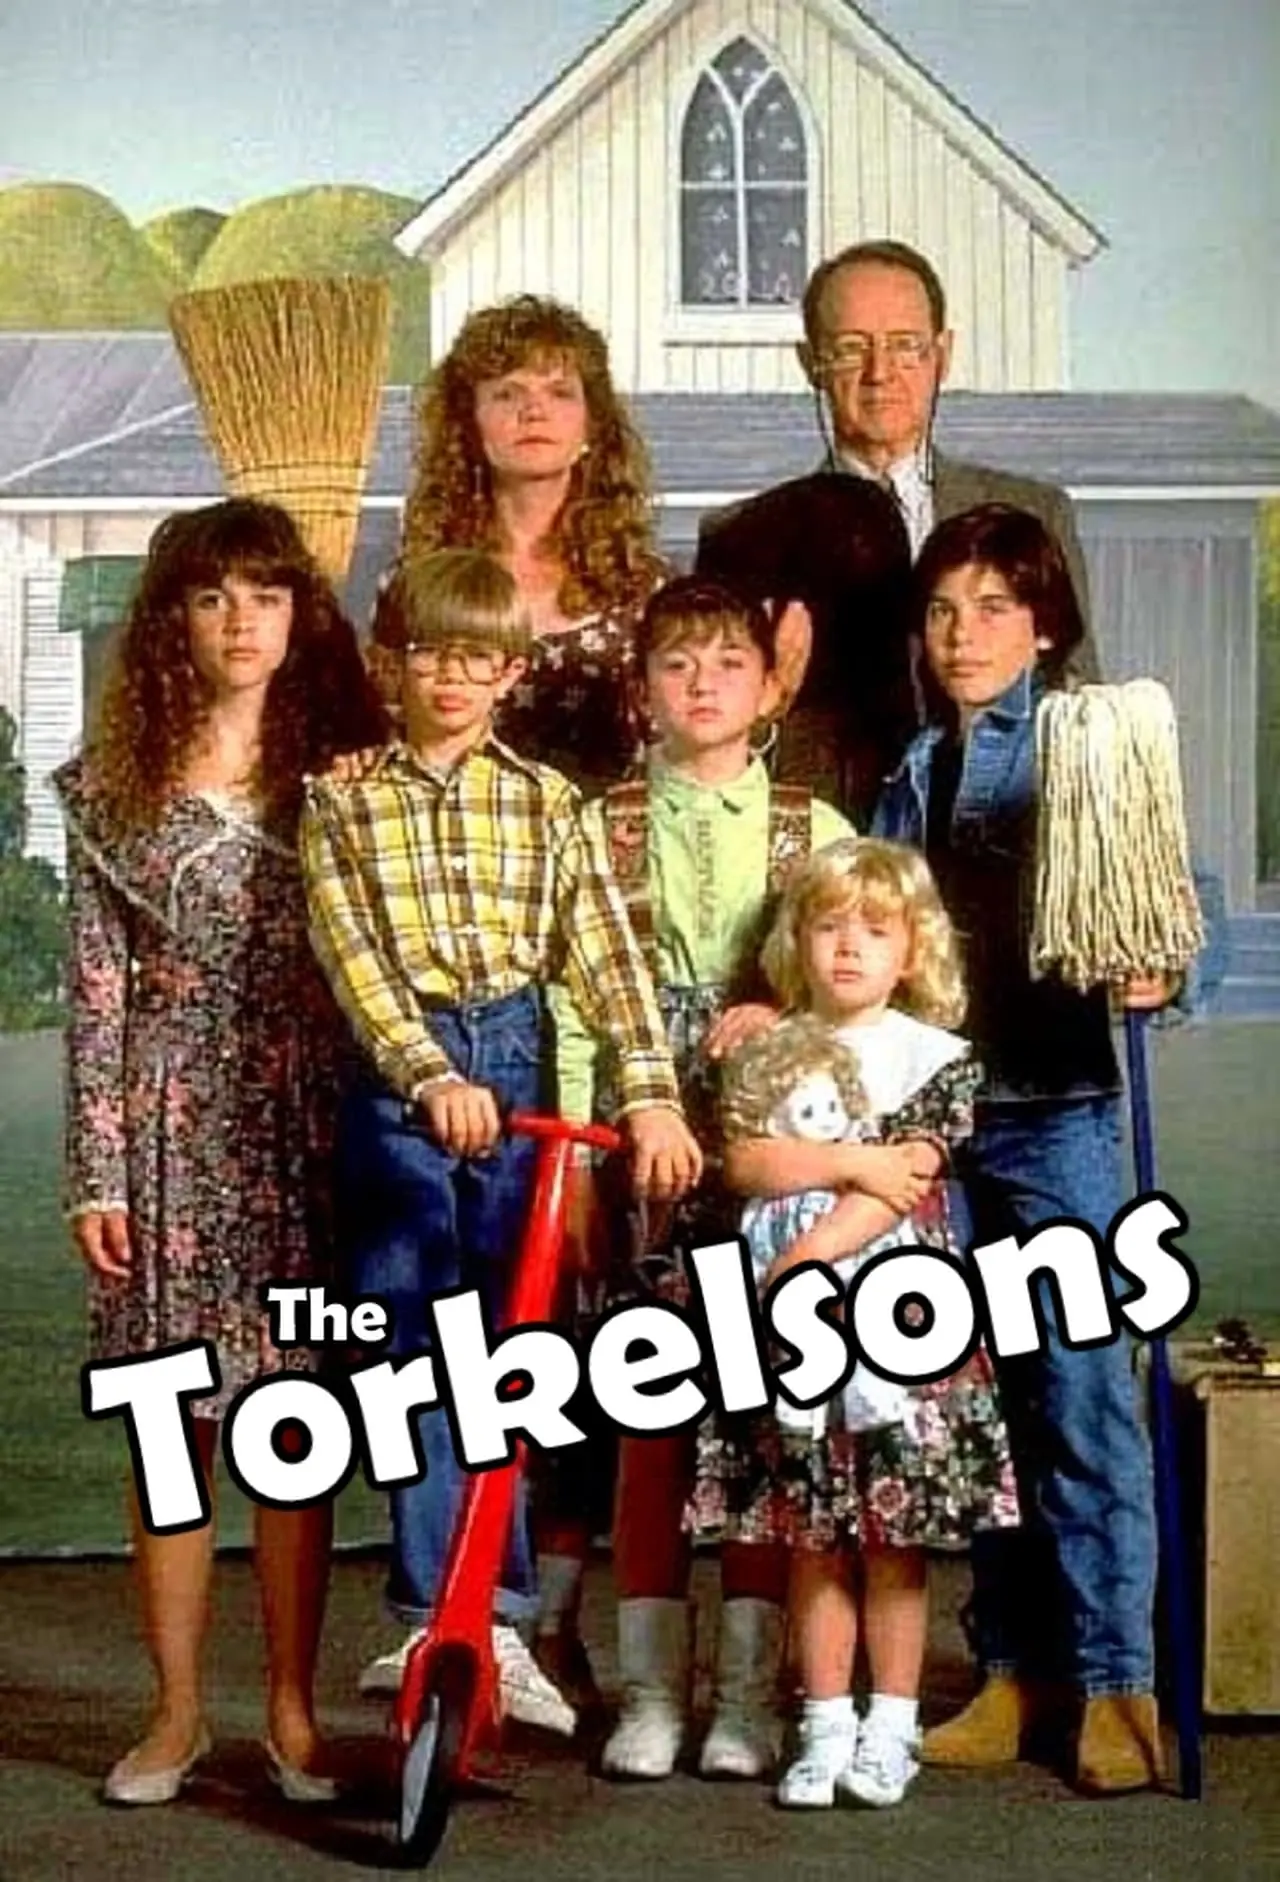 The Torkelsons (1992)